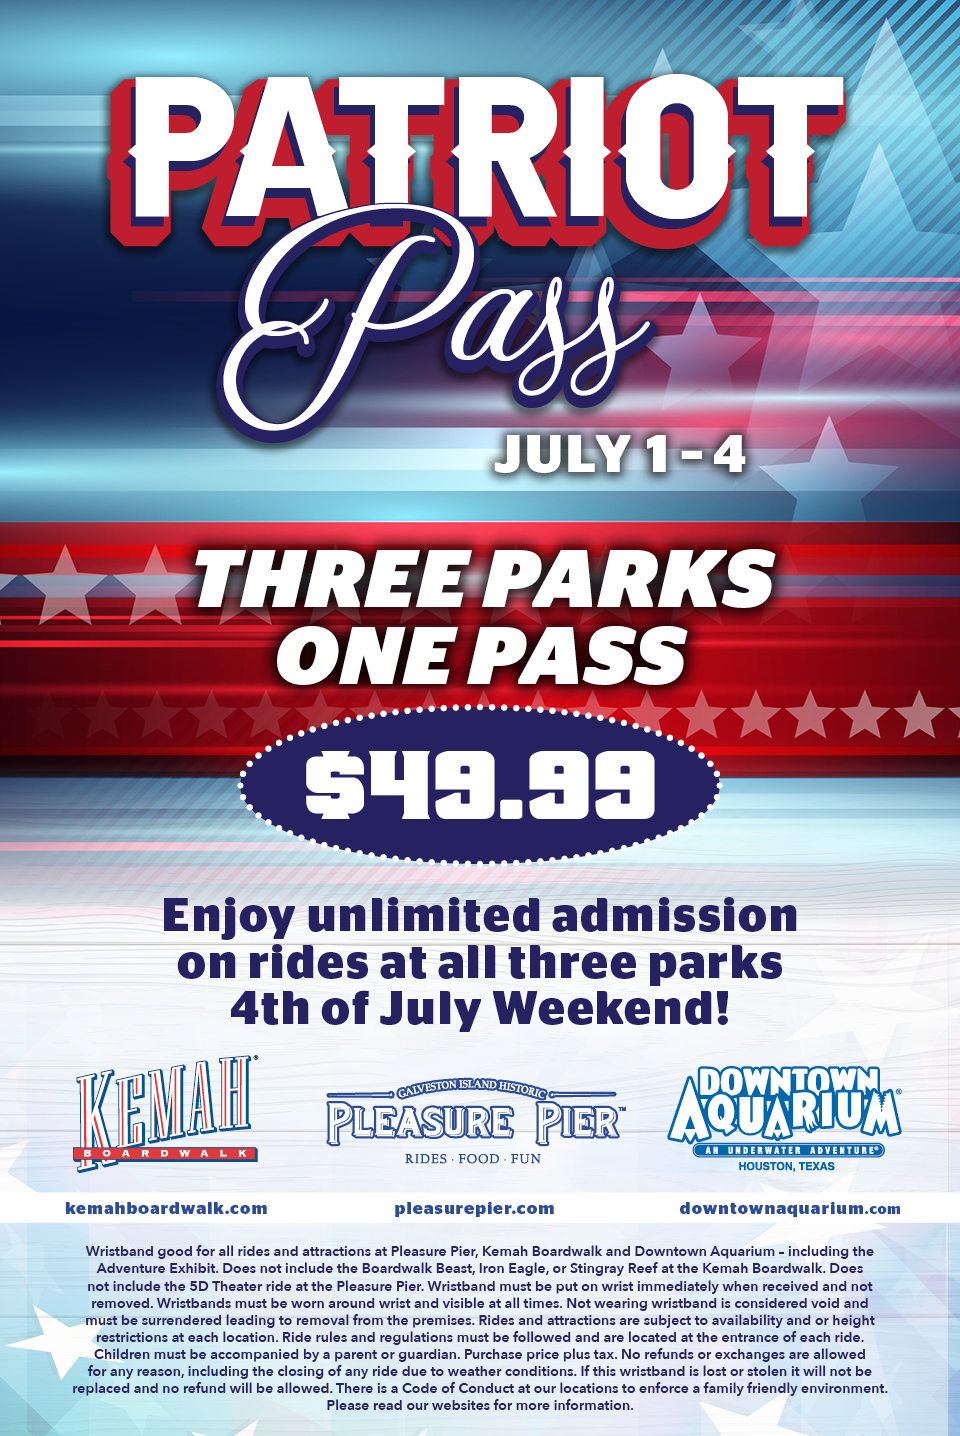 Enjoy unlimited admission on rides at all three parks for Fourth of July Weekend. Parks included are Kemah Boardwalk, Downtown Aquarium, and Pleasure Pier. Click to purchase tickets.